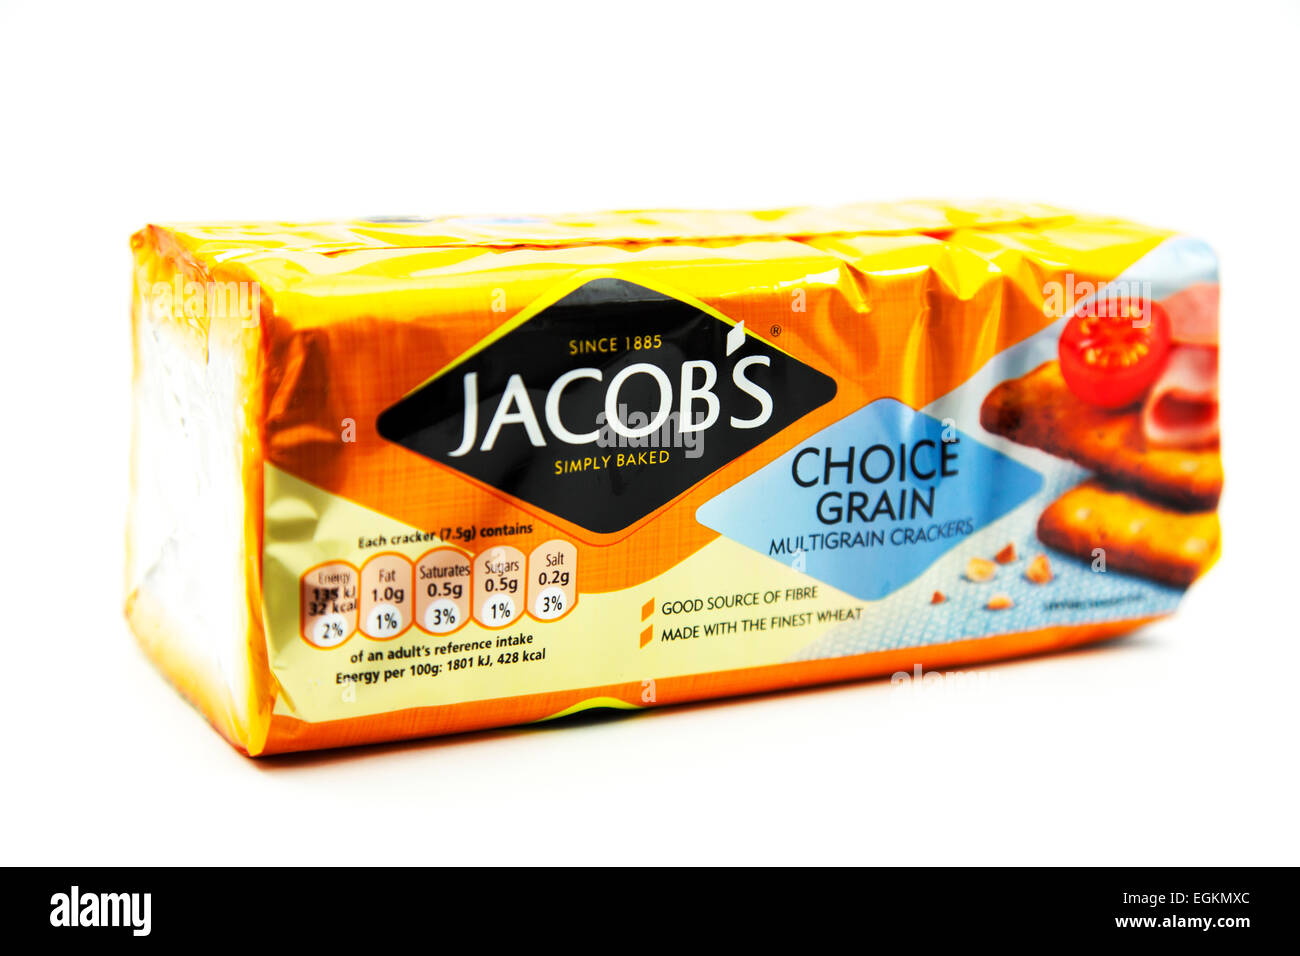 Jacob's crackers Jacobs cream multigrain pack packet logo product cutout cut out white background copy space isolated Stock Photo